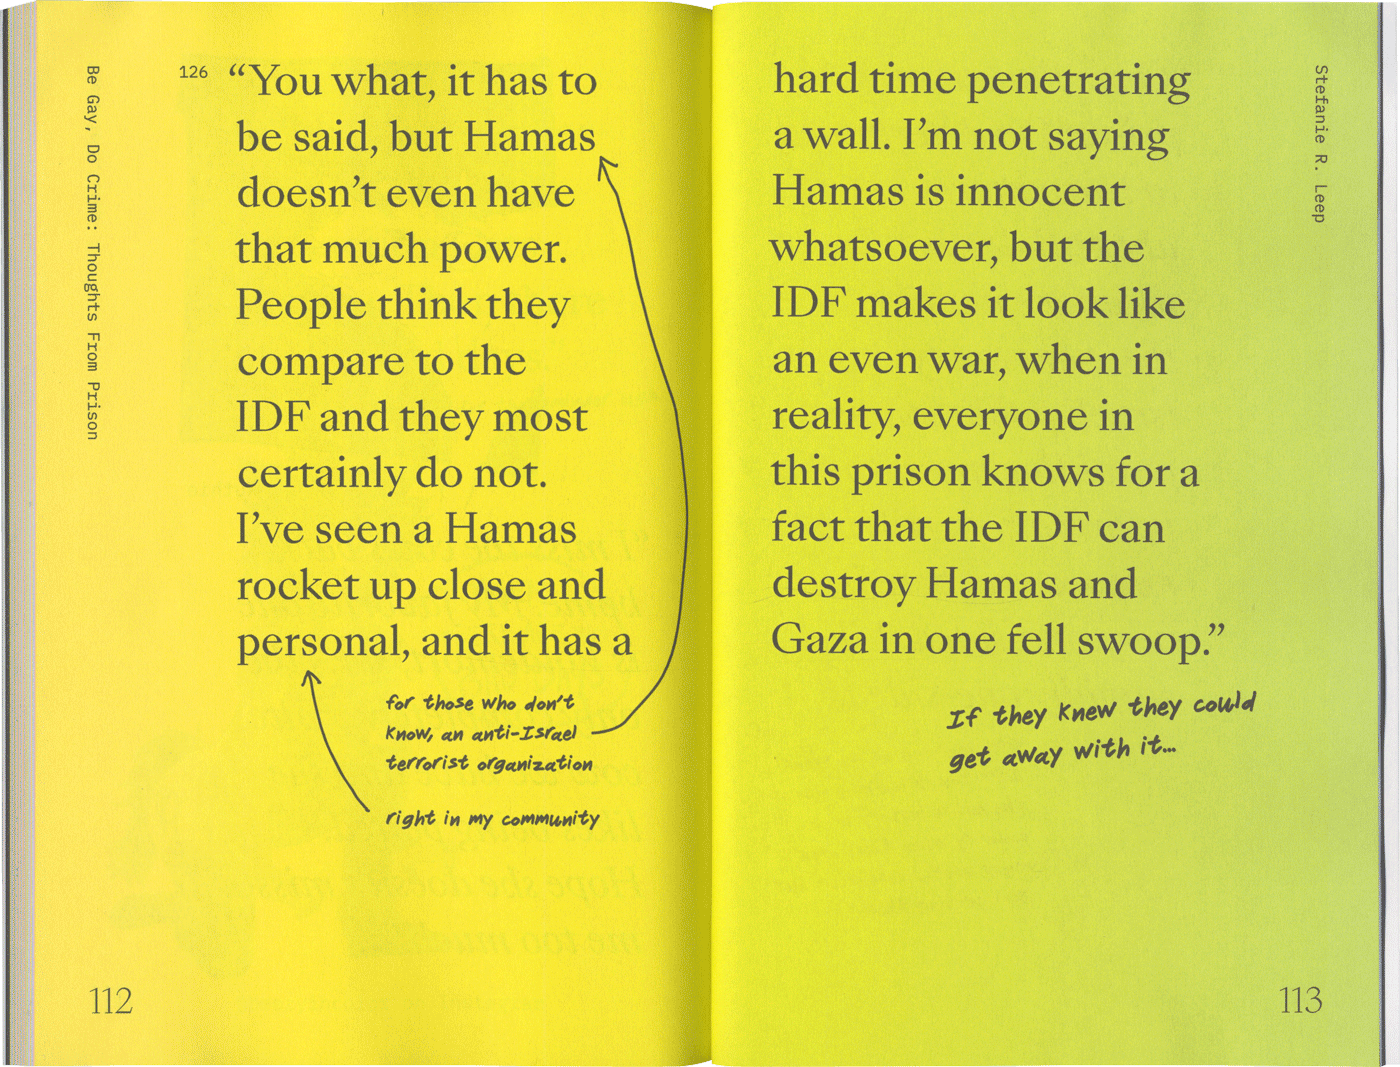 yellow and green spread of a book with large quotes and a few more handwritten notes, including hand-drawn arrows to point to the related text